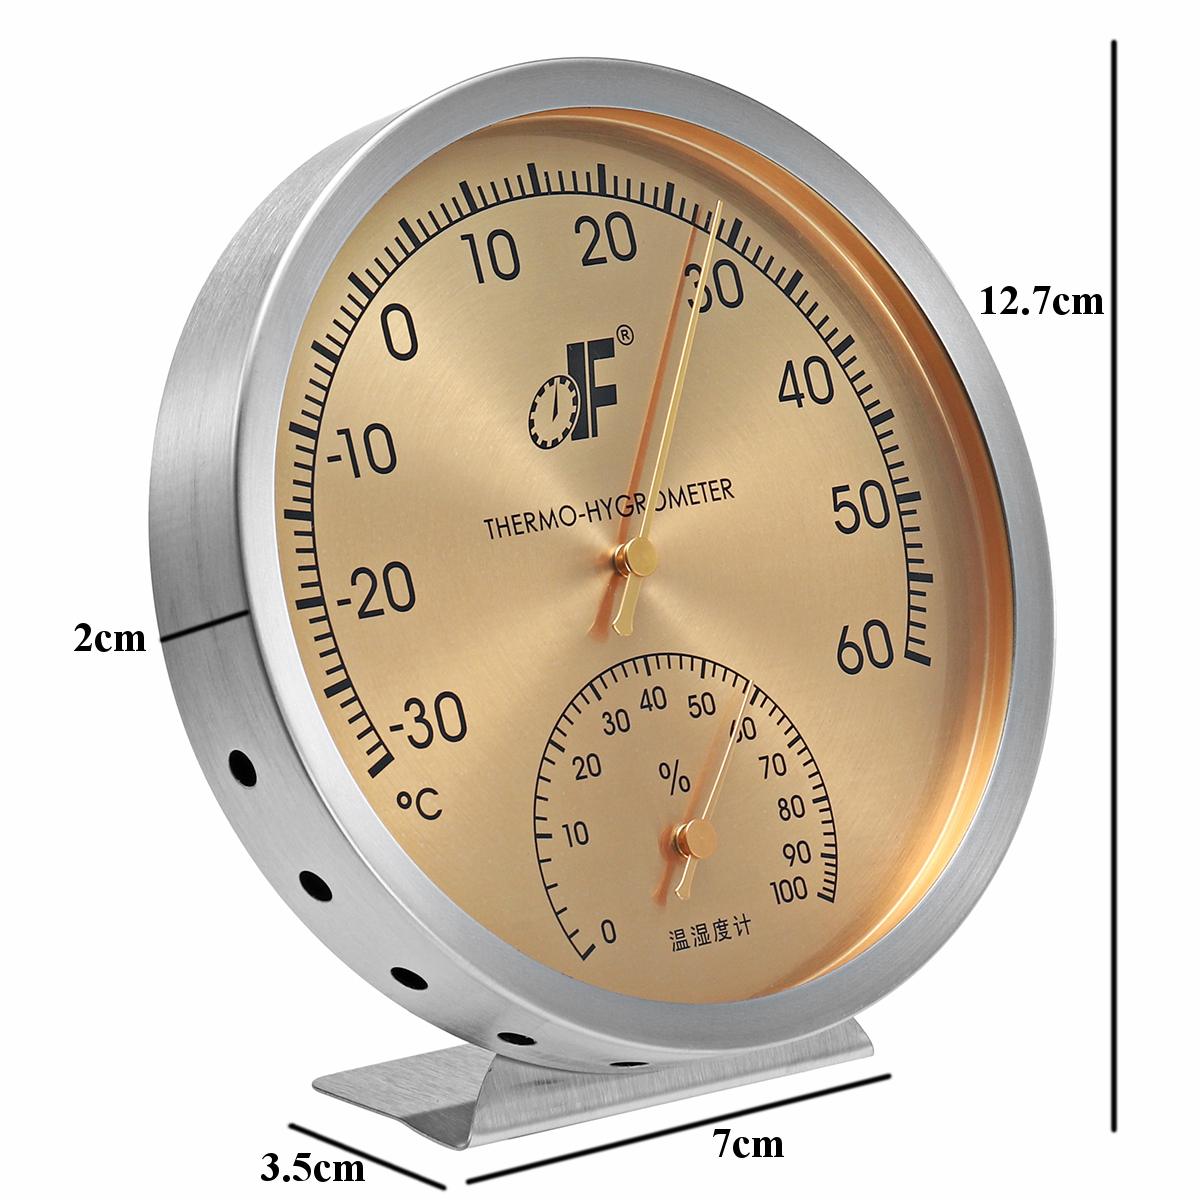 127mm-Weather-Station-Barometer-Thermometer-Hygrometer-Wall-Hanging--3060-0100Rh-1321146-8